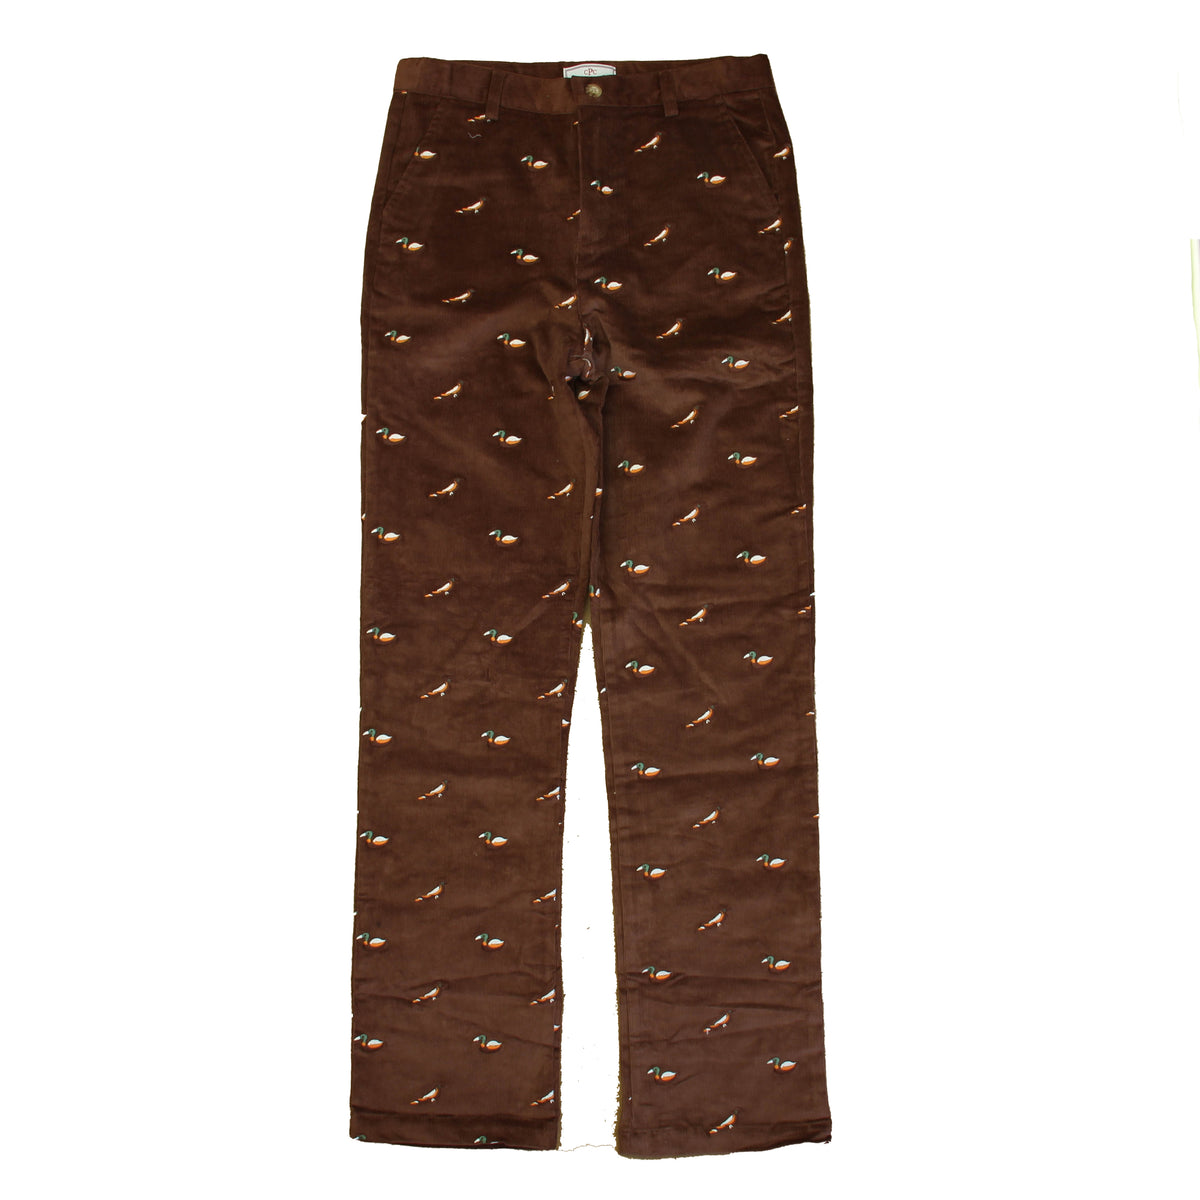 New with Tags: Fudgesicle w/ Bird Embroidery Pants -- FINAL SALE